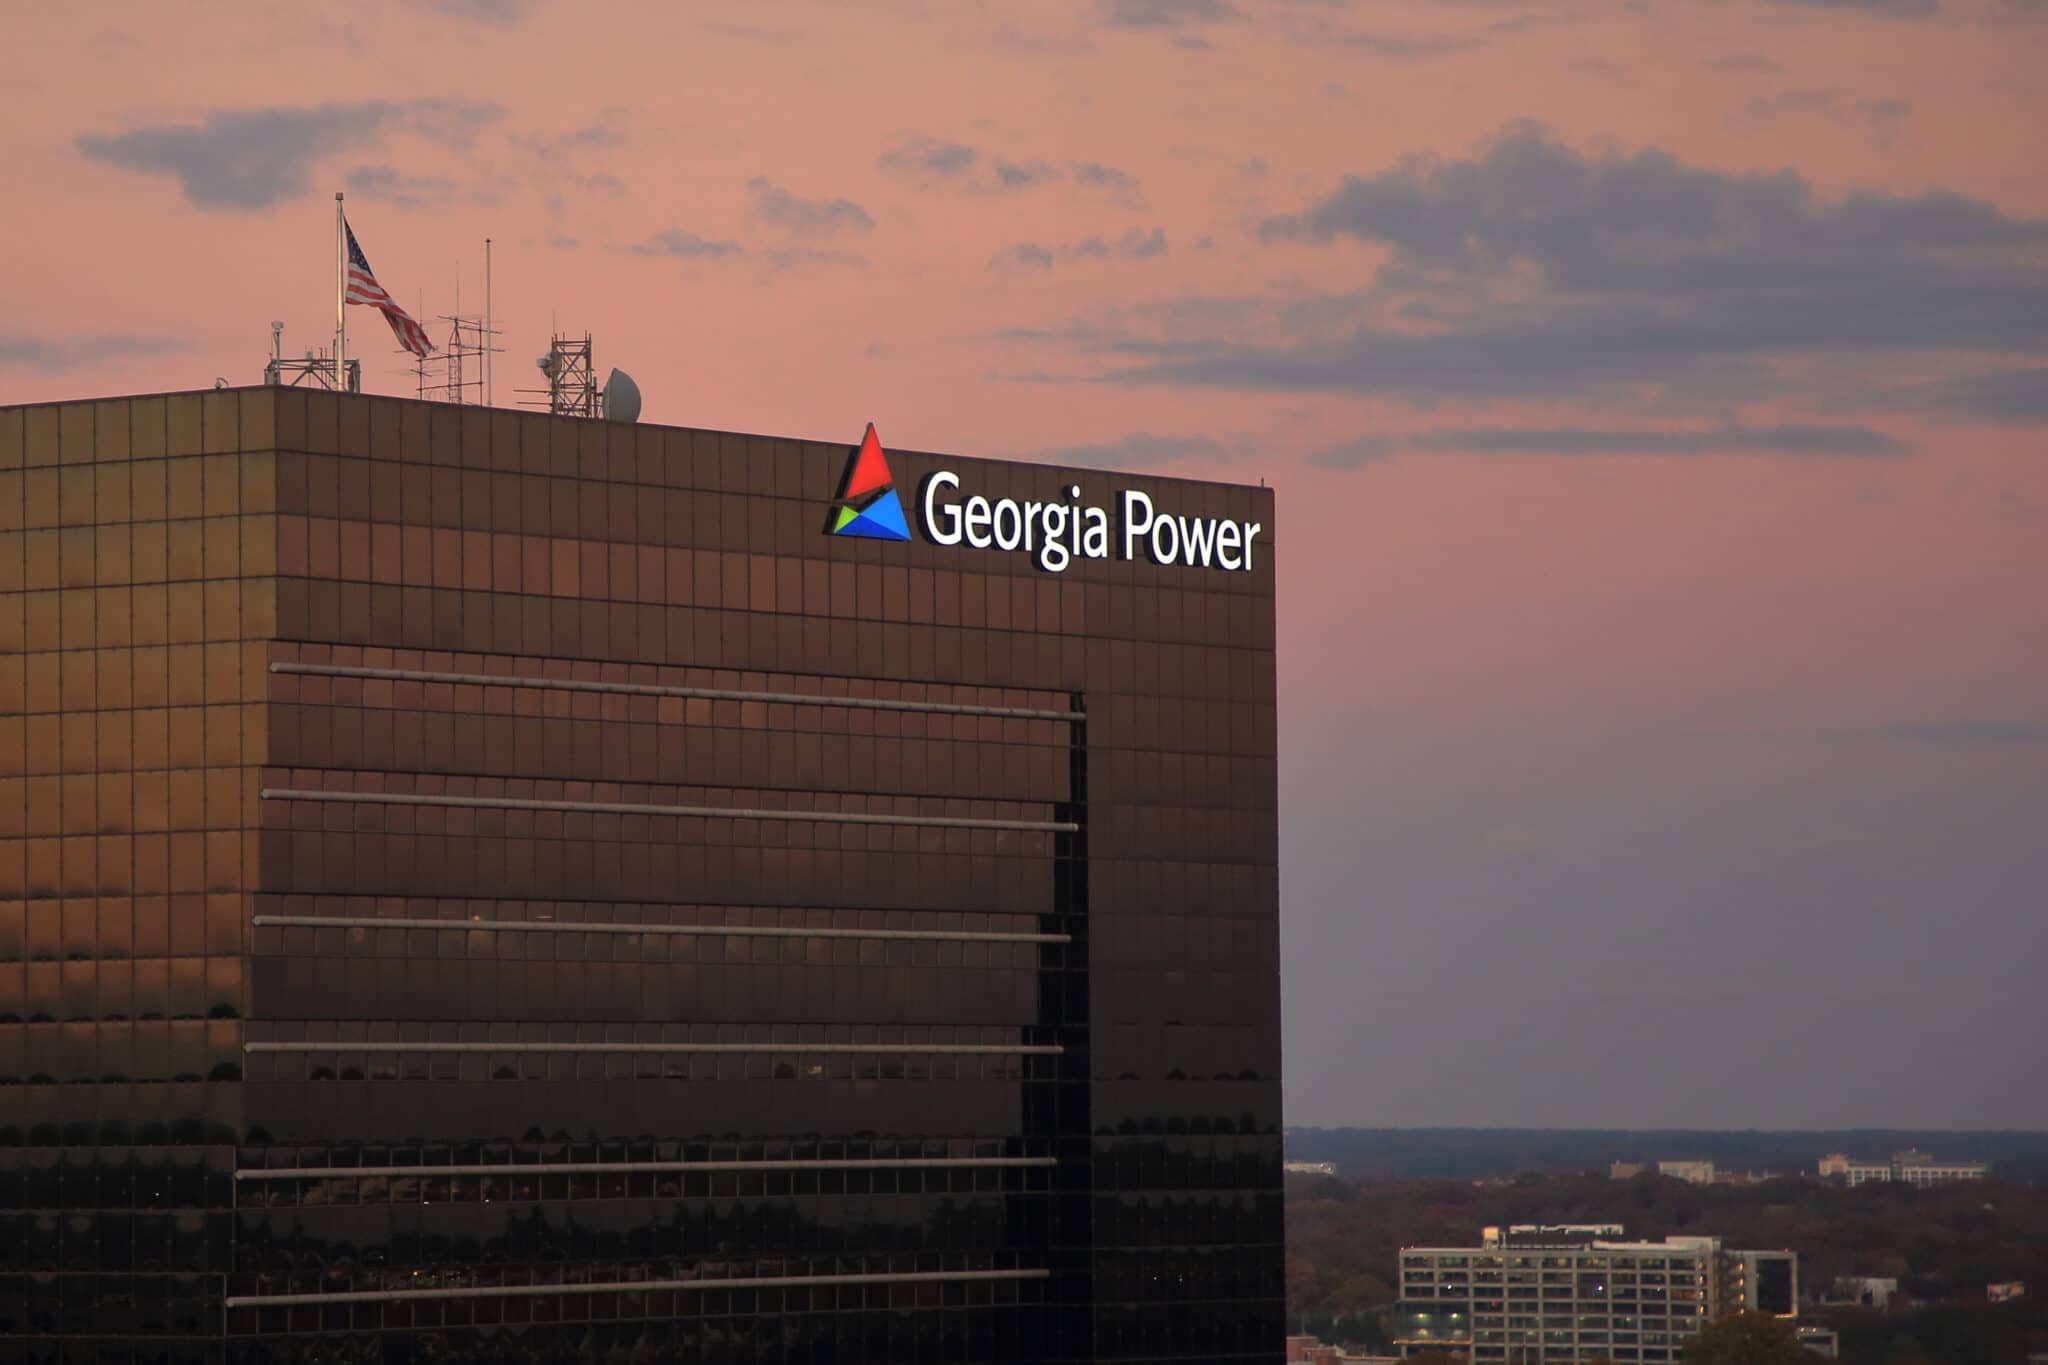 Georgia energy officials went along with Georgia Power's $15.90 rate hike